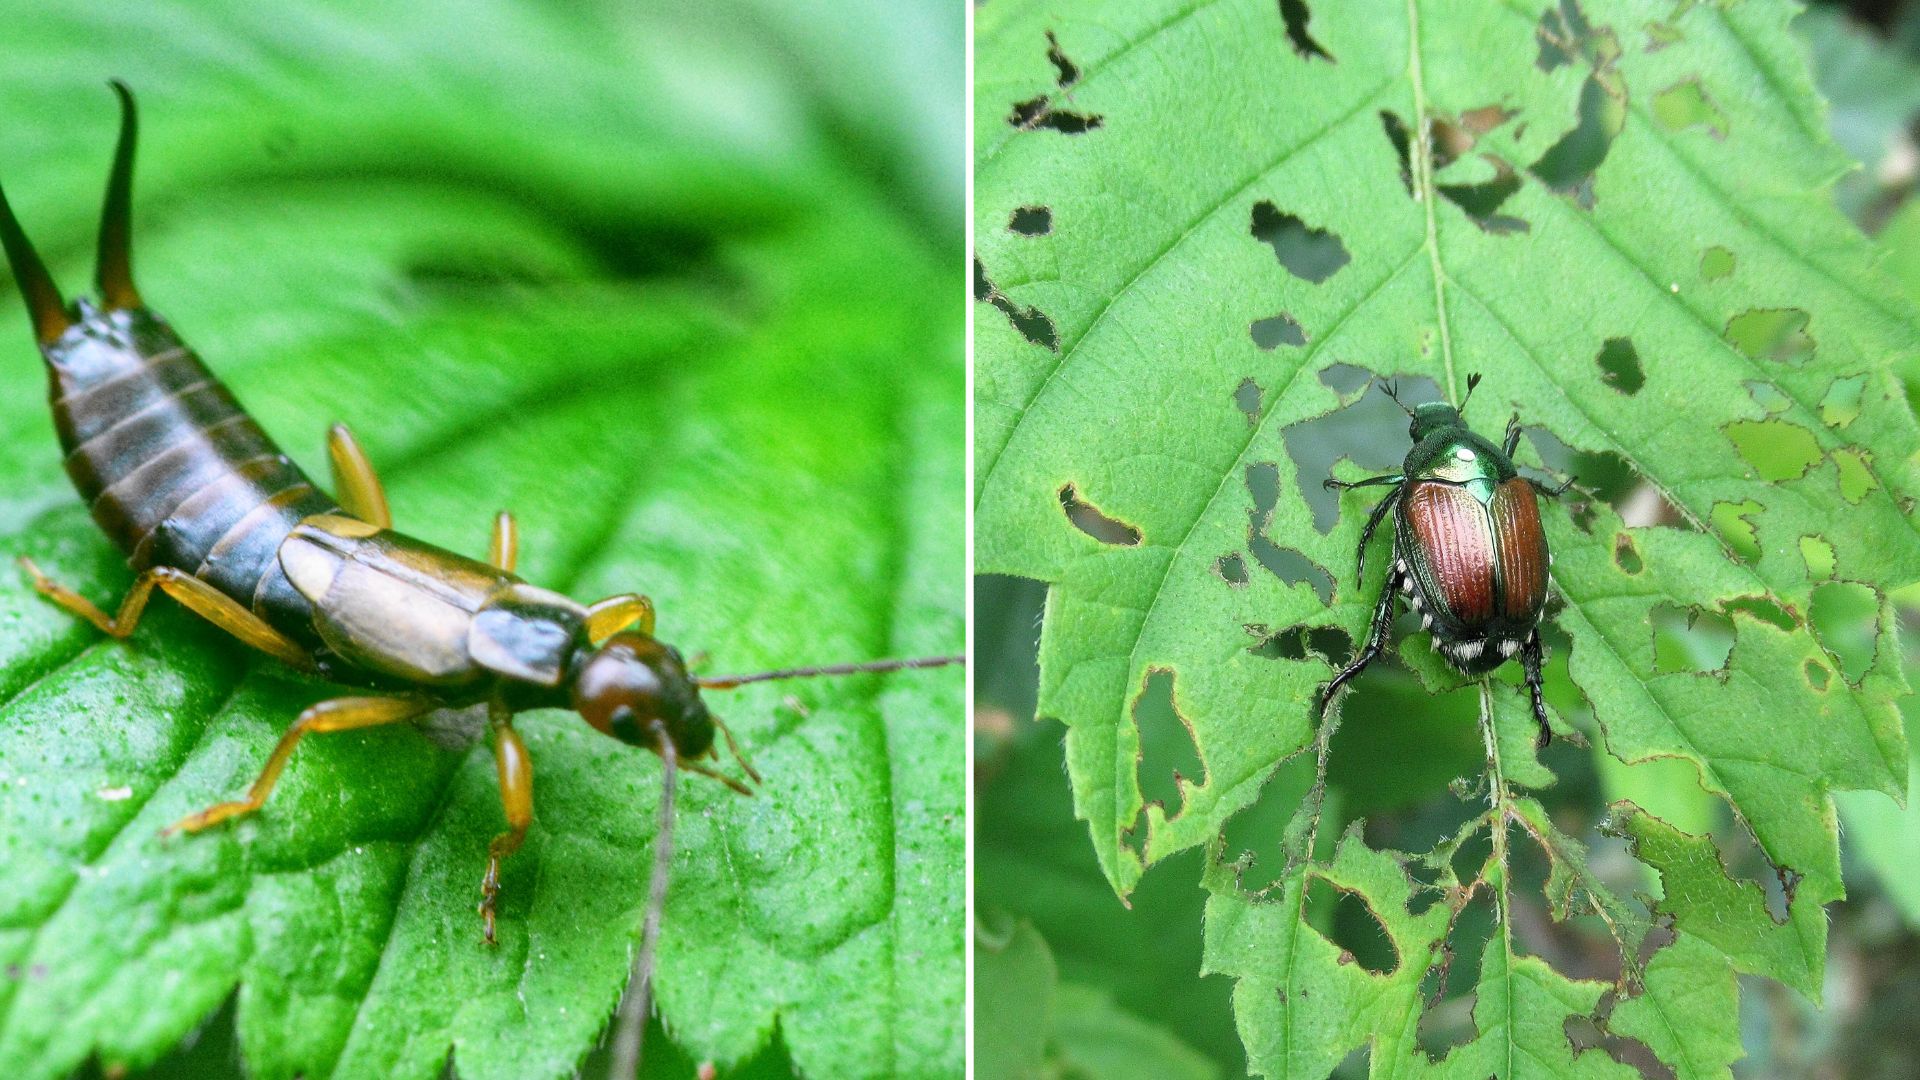 Keep Your Garden Safe By Getting Rid Of These 7 Pesky Pests